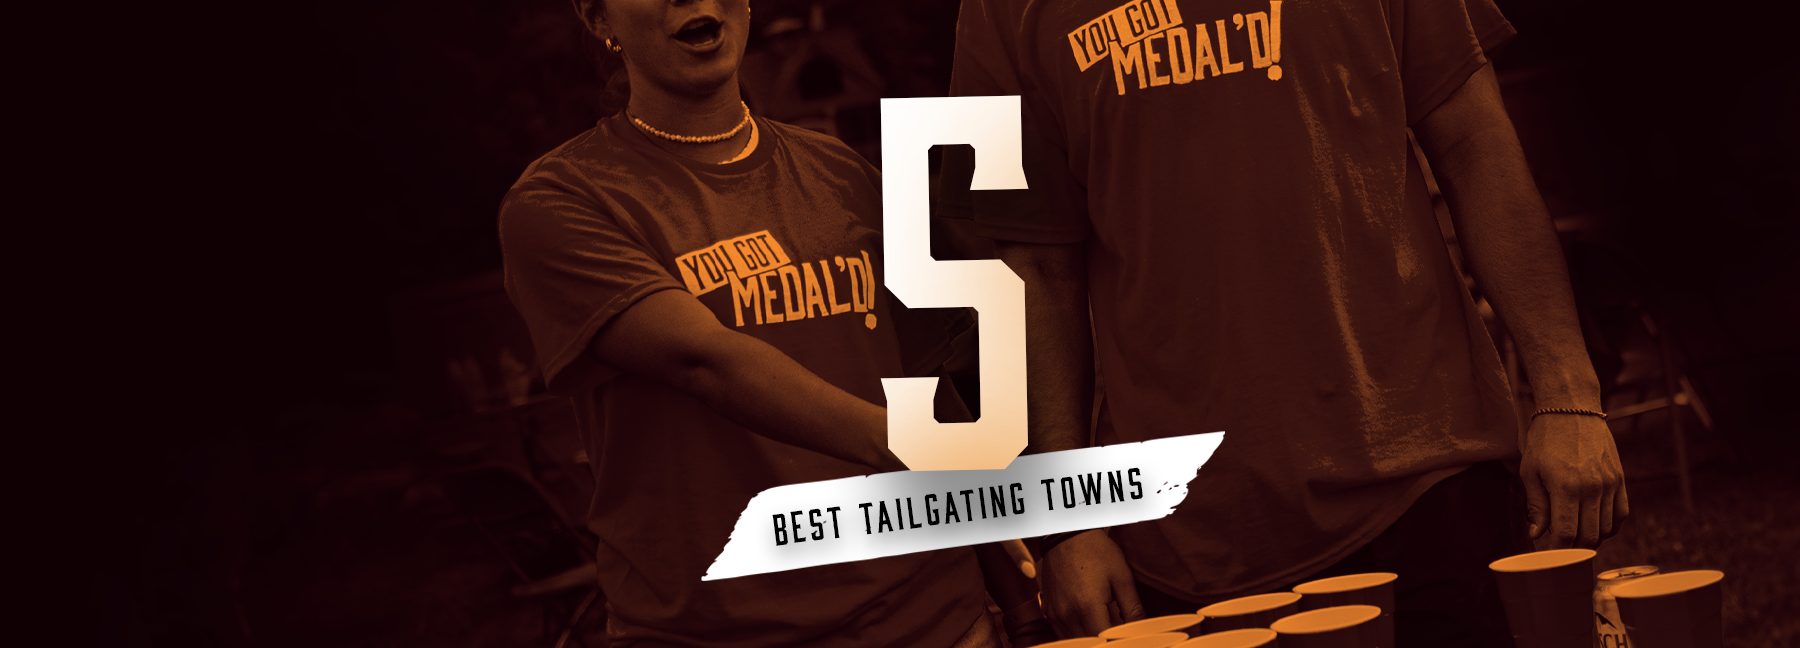 Top 5 College Tailgating Towns